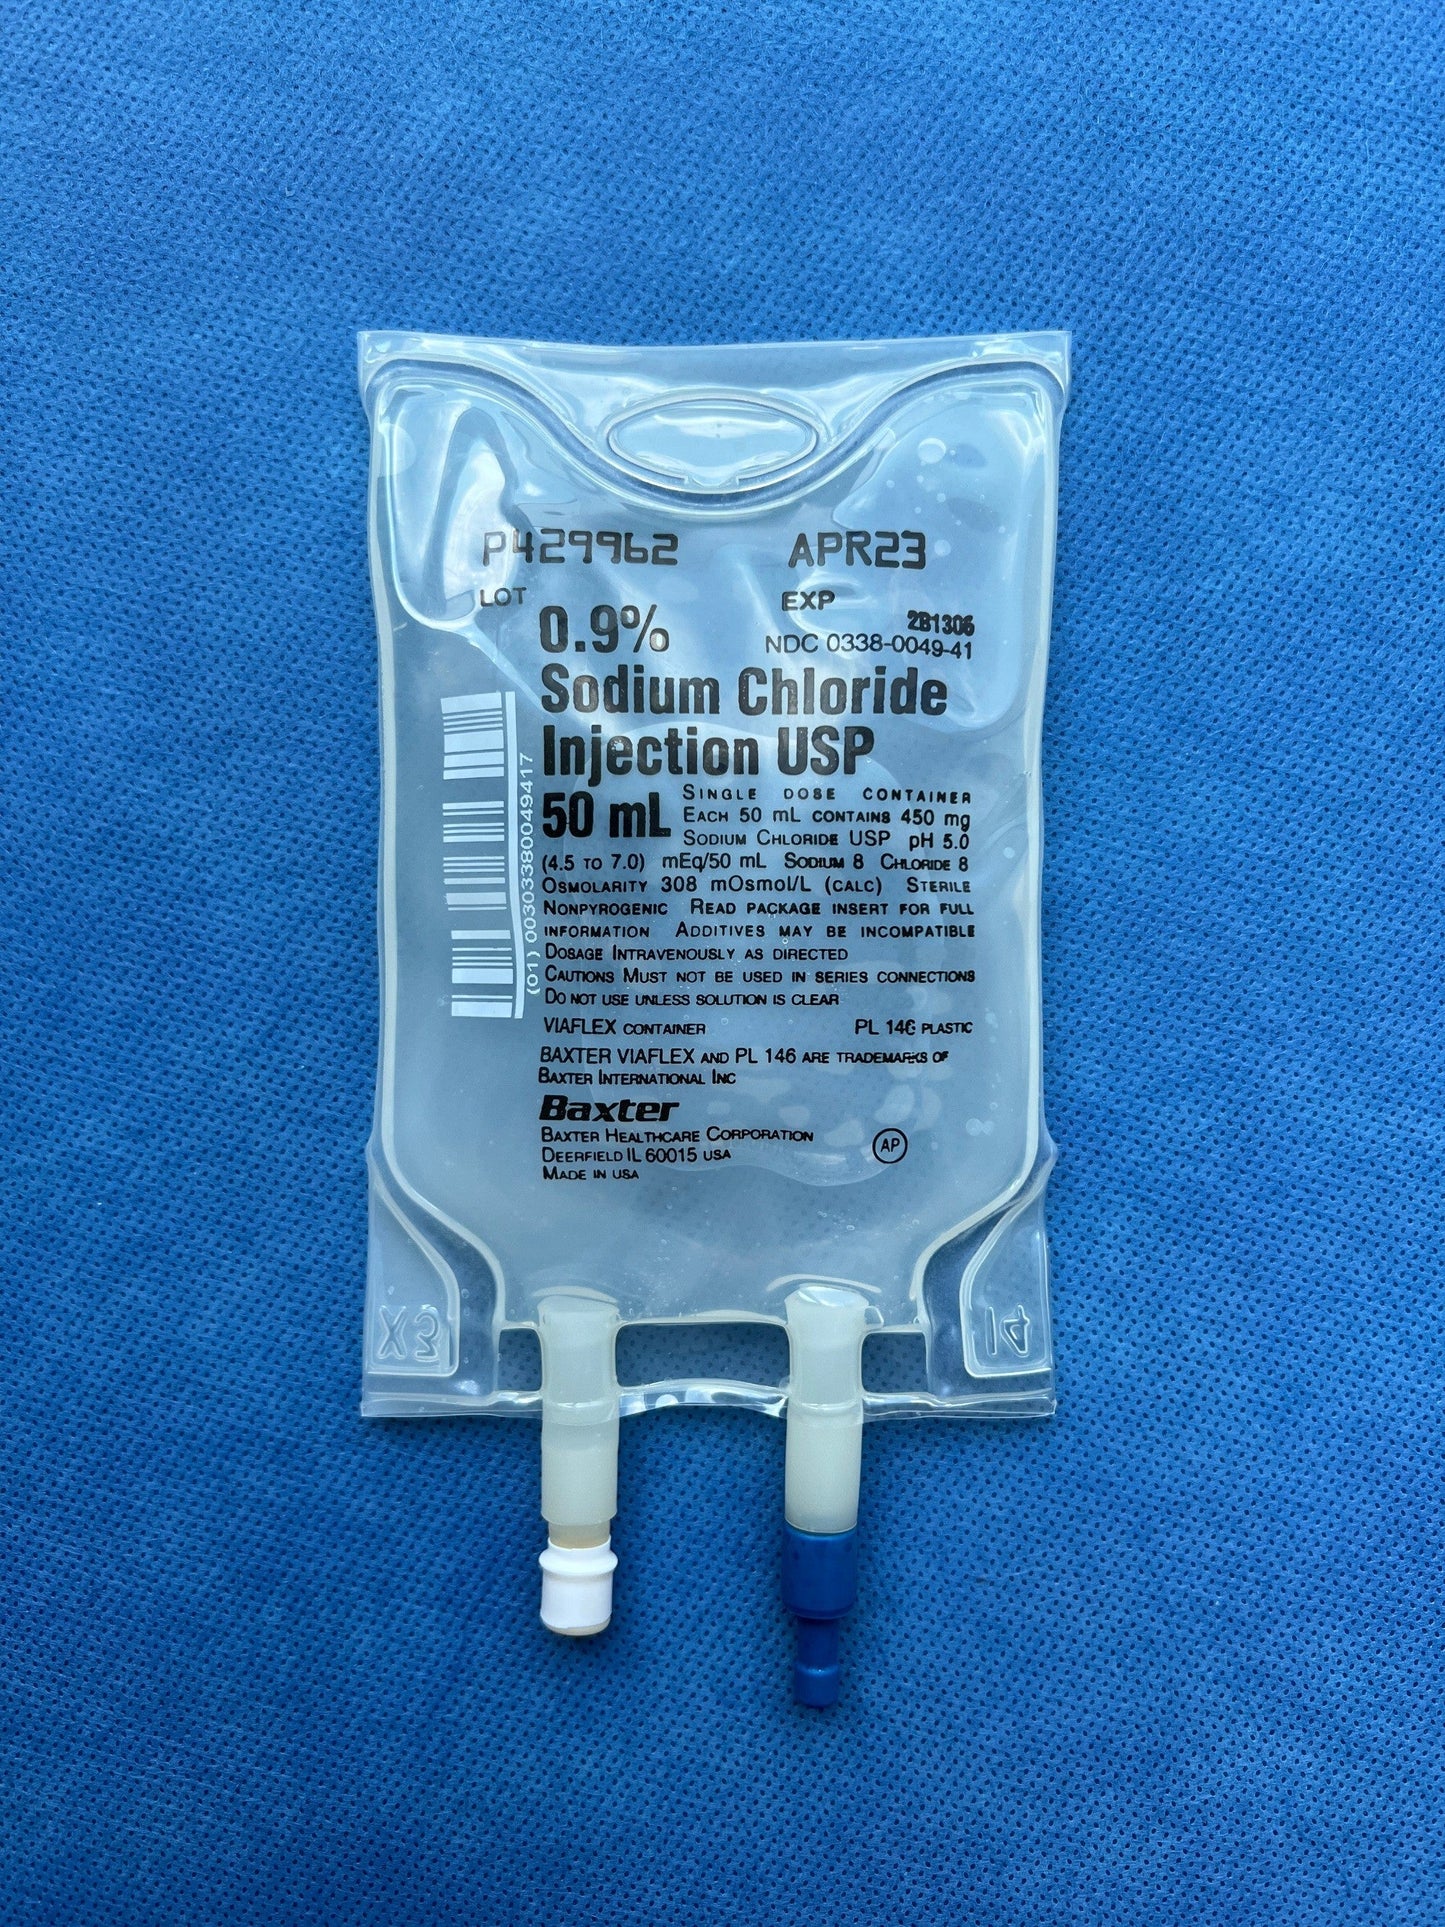 No Rx Required - IV Fluid Bag 0.9% Sodium Chloride (Normal Saline Solution) - 50mL-1000mL